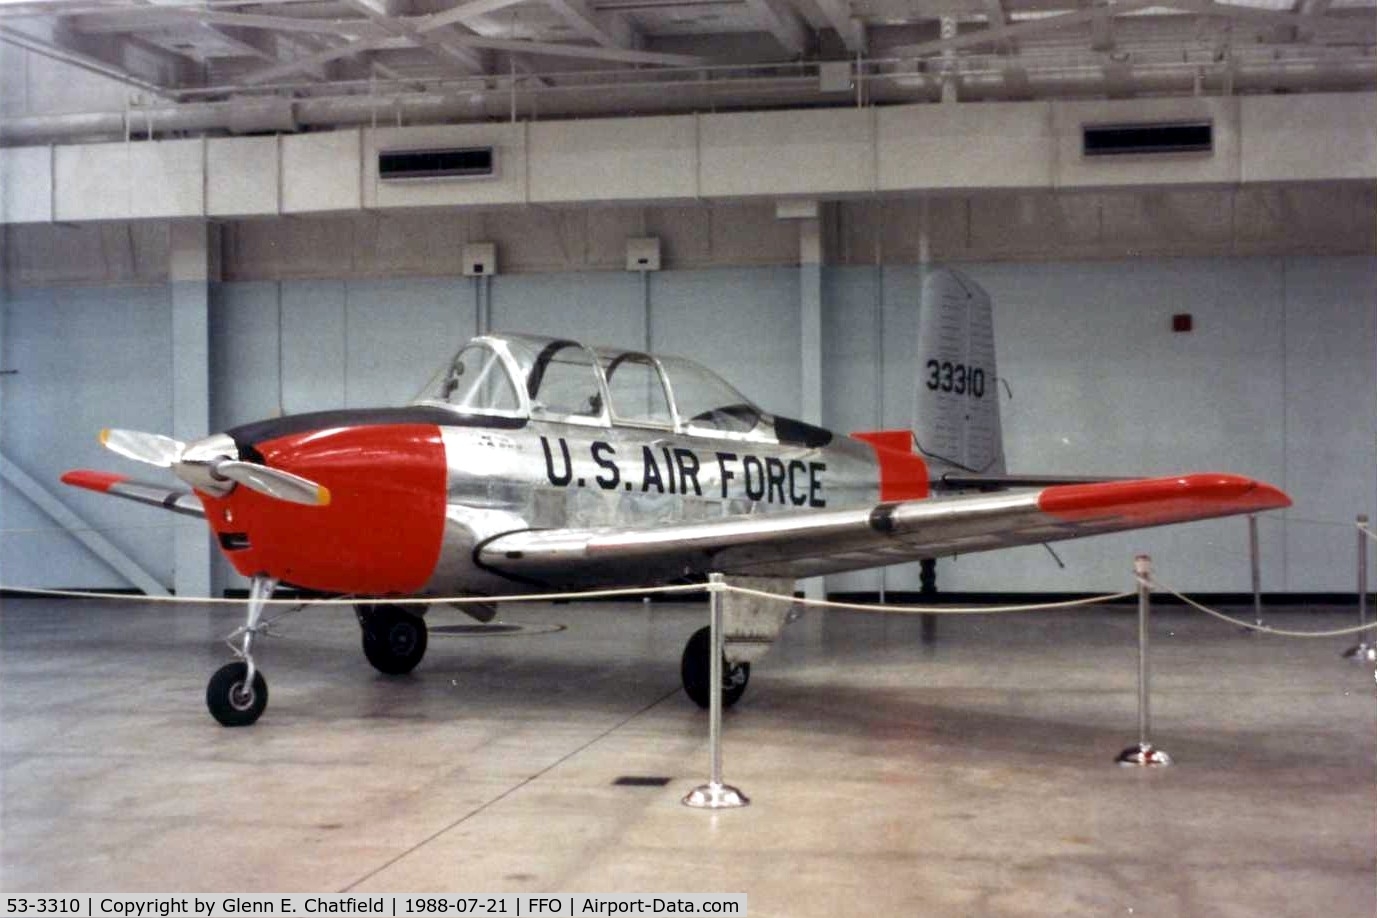 53-3310, 1953 Beech T-34A (A45) Mentor C/N G-71, T-34A at the National Museum of the U.S. Air Force